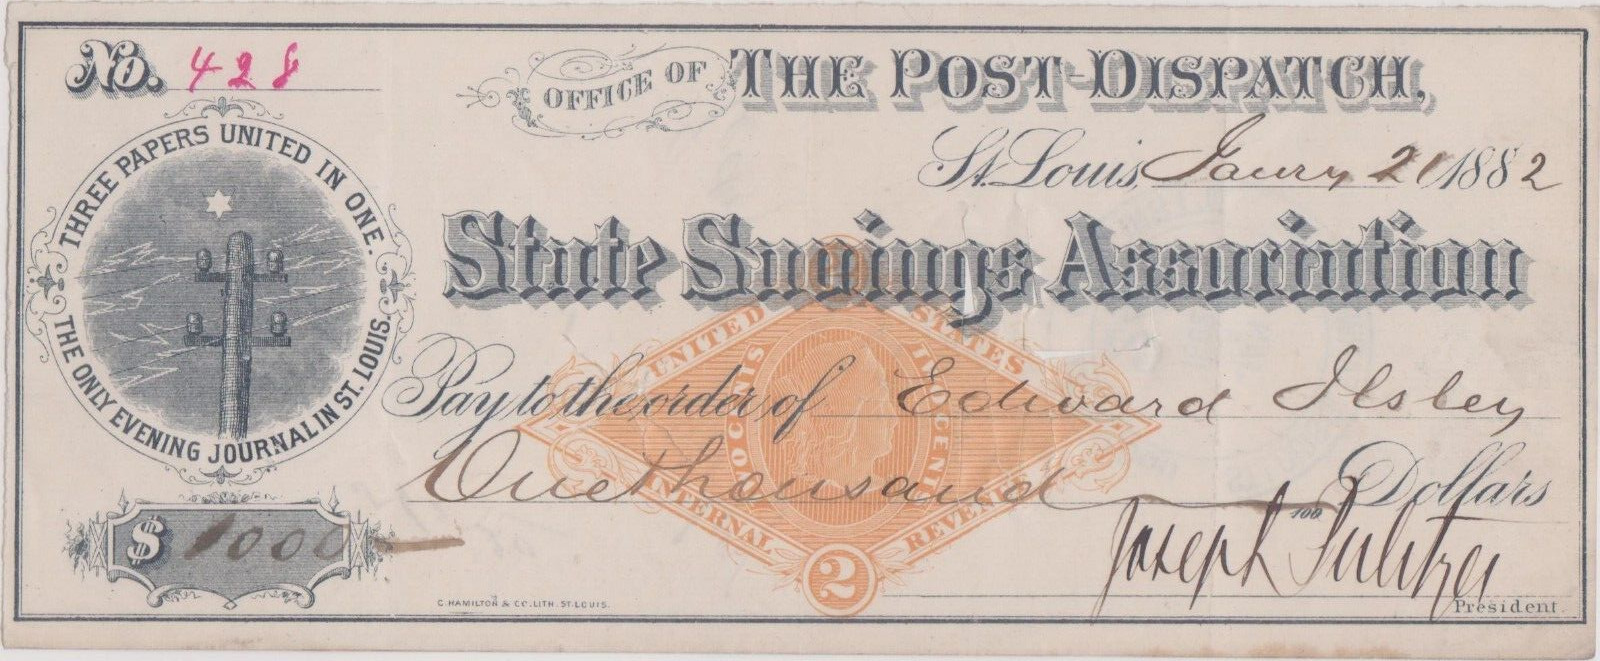 JOSEPH PULITZER SIGNED CHECK DATED JANUARY 21, 1882 - FAMOUS NEWSPAPER PUBLISHER